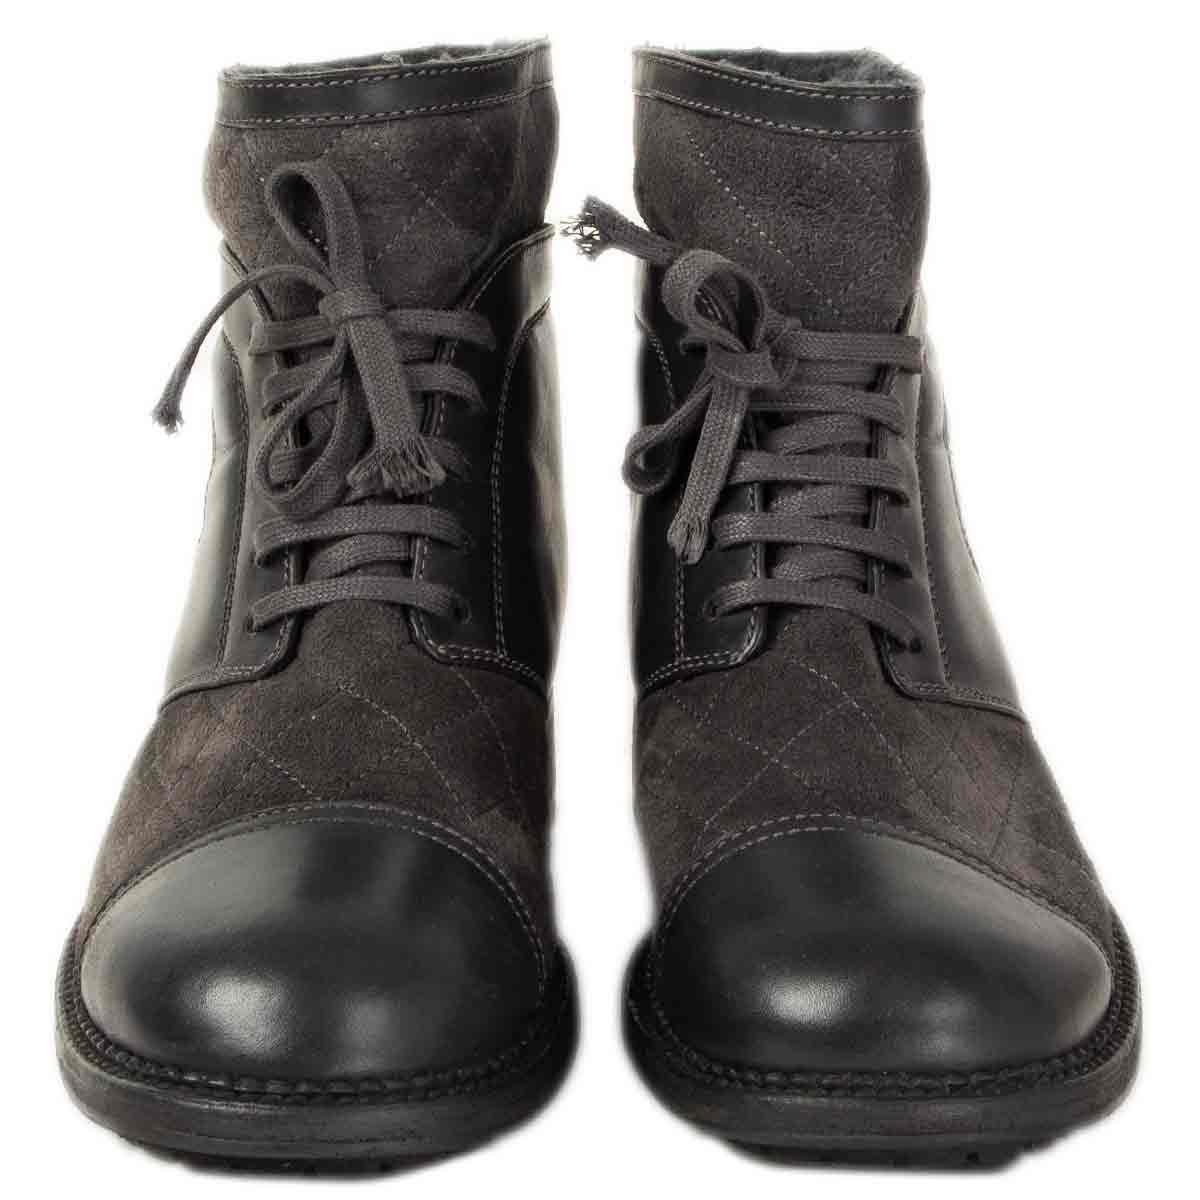 100% authentic Chanel quilted lace-up ankle-boots in grey suede and charcoal calfskin featuring CC logo stitching on the side and shearling lining. Have been worn and are in excellent condition. 

Measurements
Imprinted Size	38
Shoe Size	38
Inside